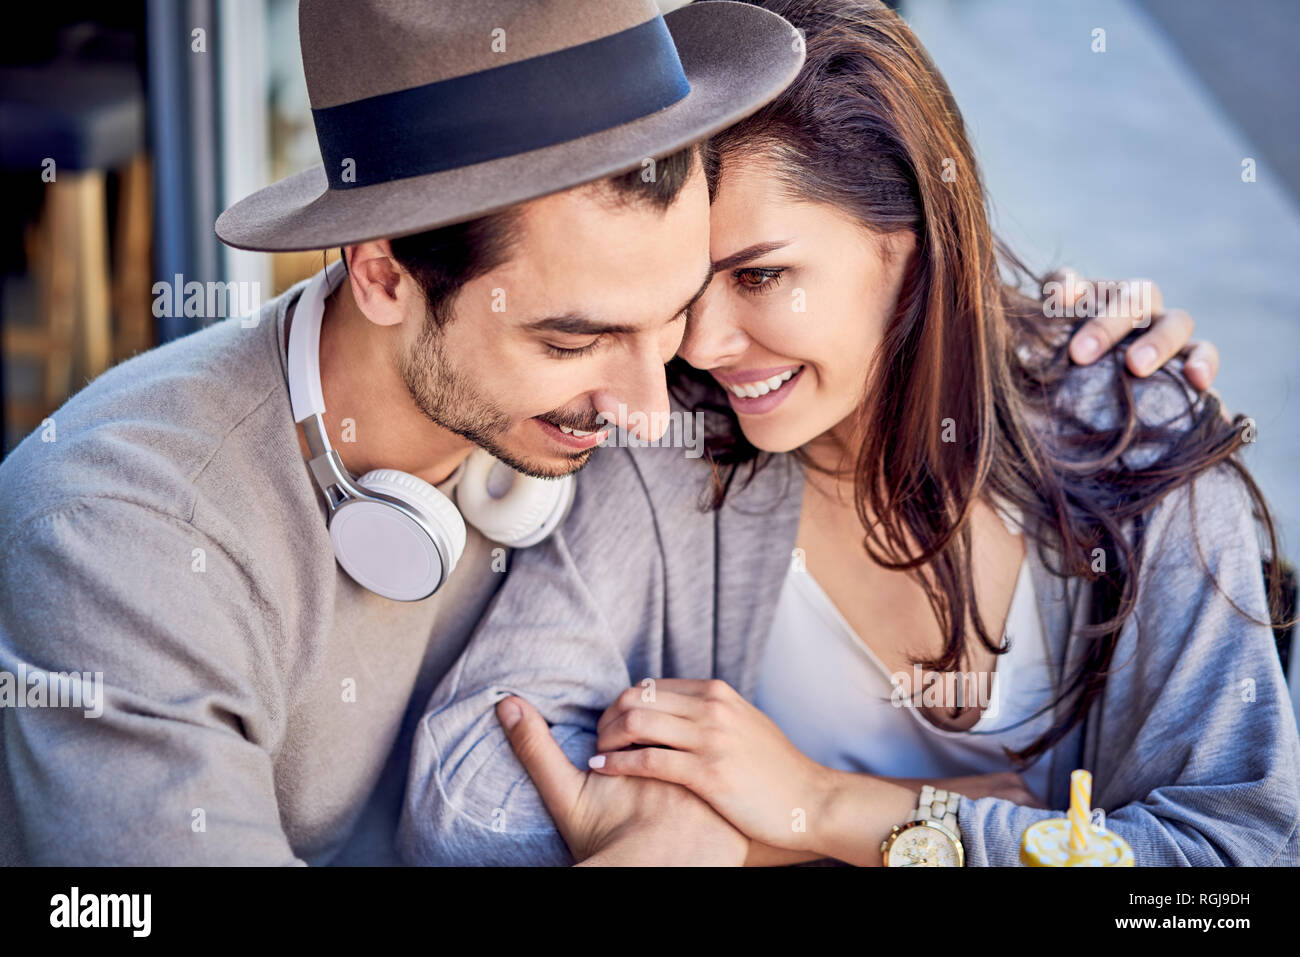 Happy affectionate young couple cuddling outdoors Stock Photo